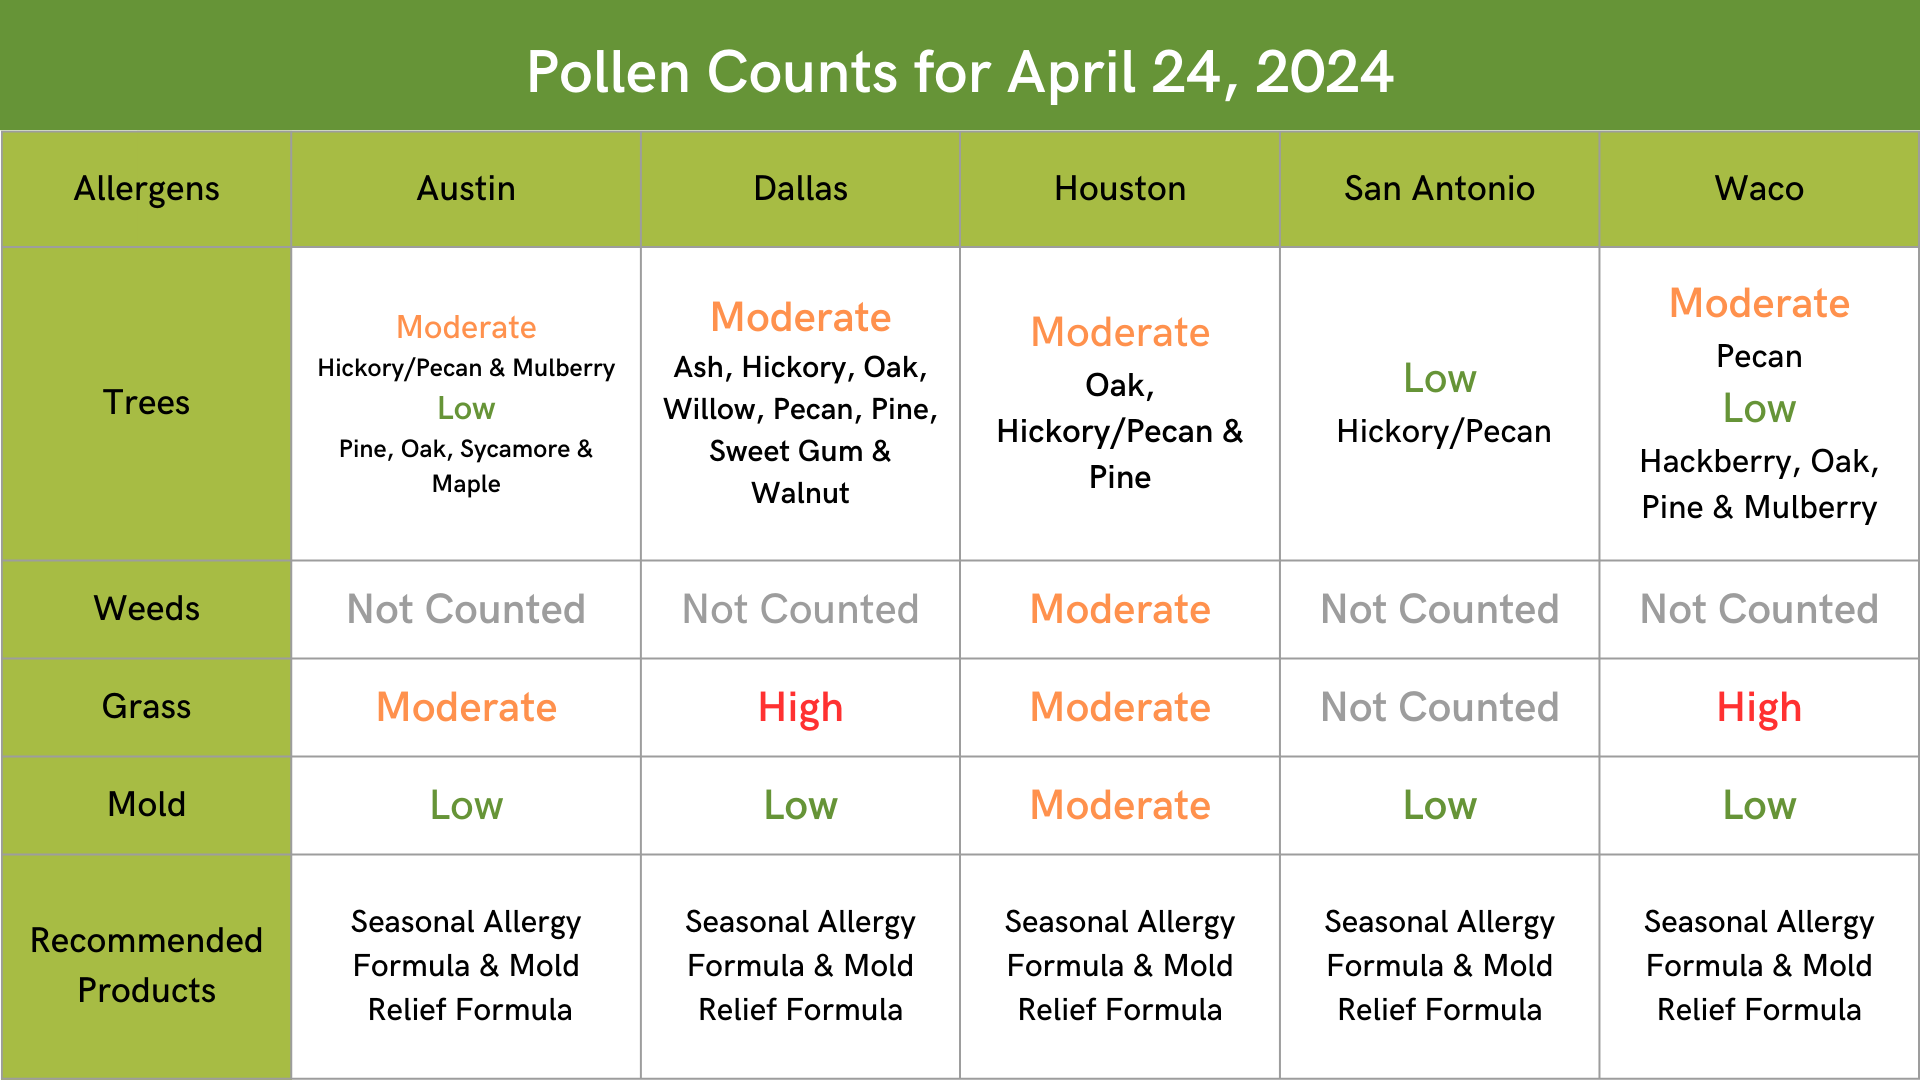 Texas Allergy Pollen Counts of Trees, Weeds, Grass and Mold in Austin, Dallas, Houston, San Antonio and Waco on April 24, 2024